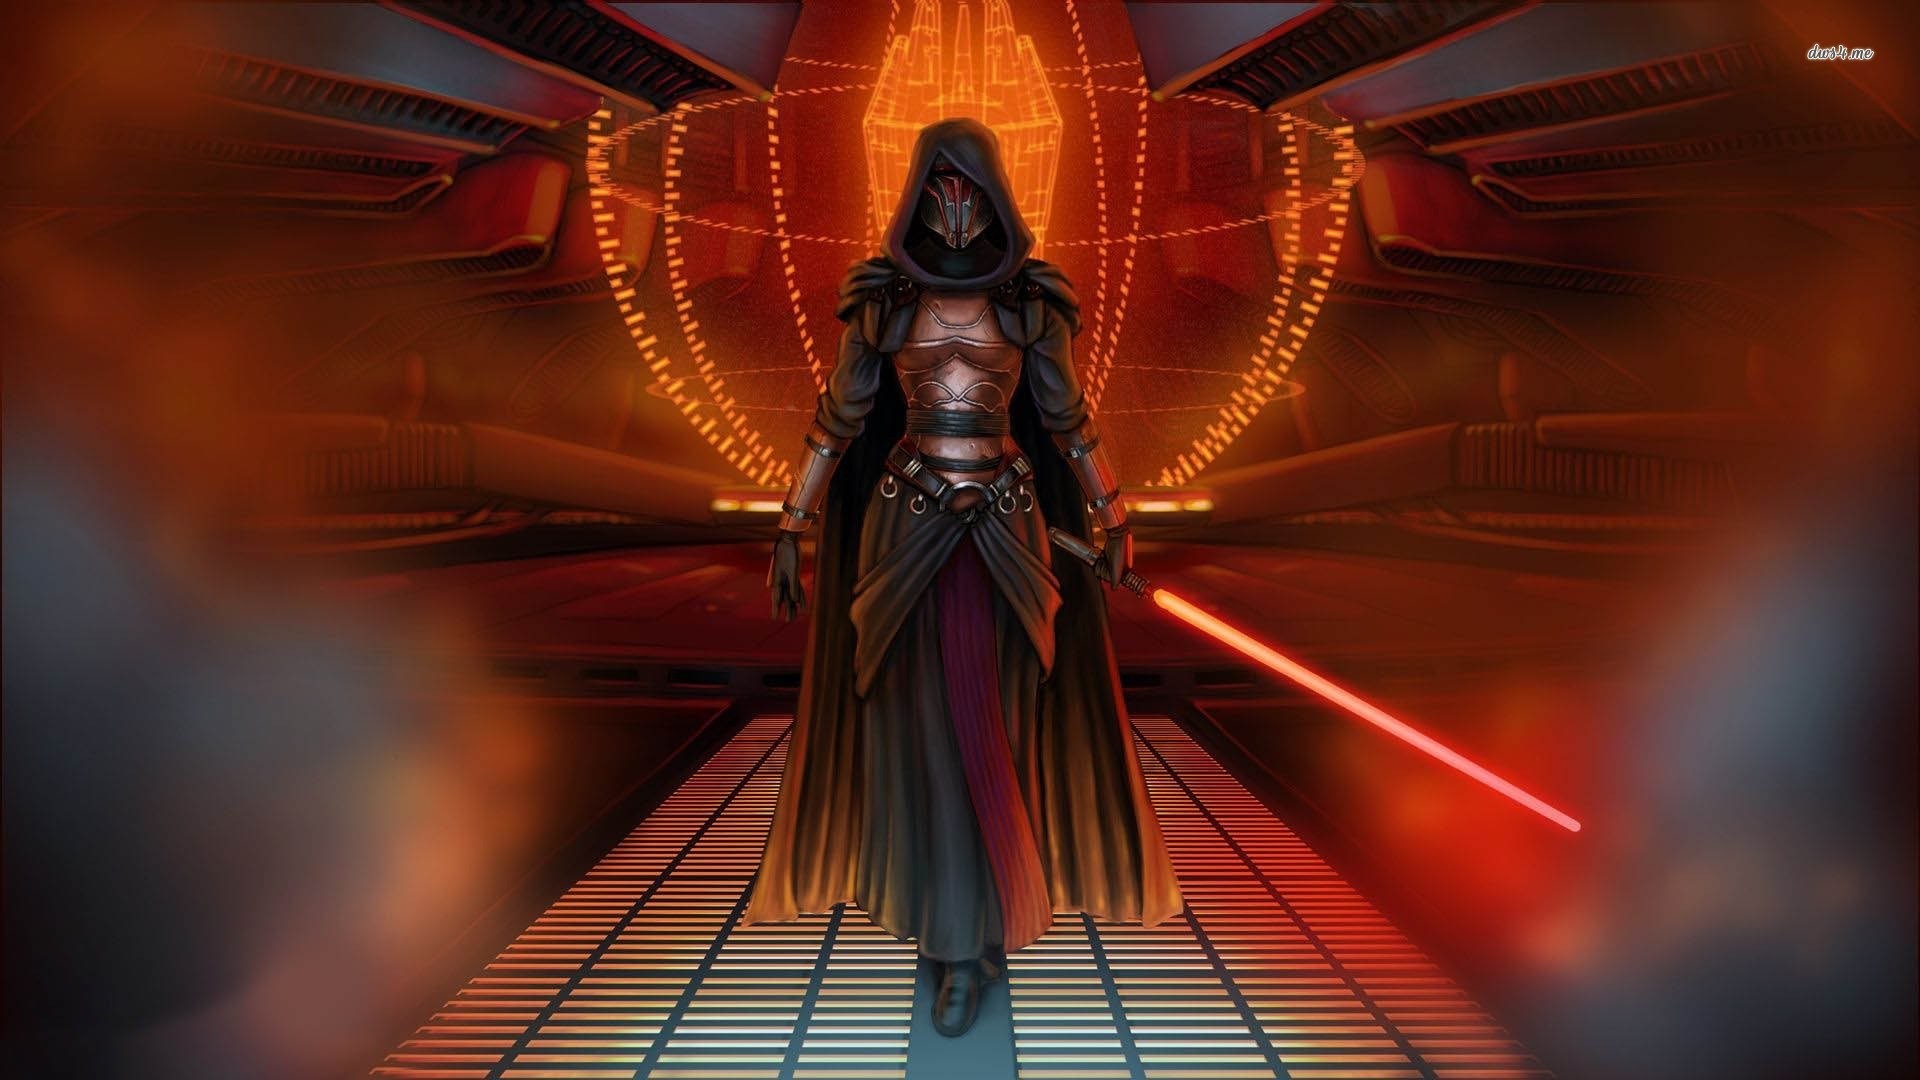 1920x1080 wallpapers swtor; artwork darth malak revan knights of the old republic star